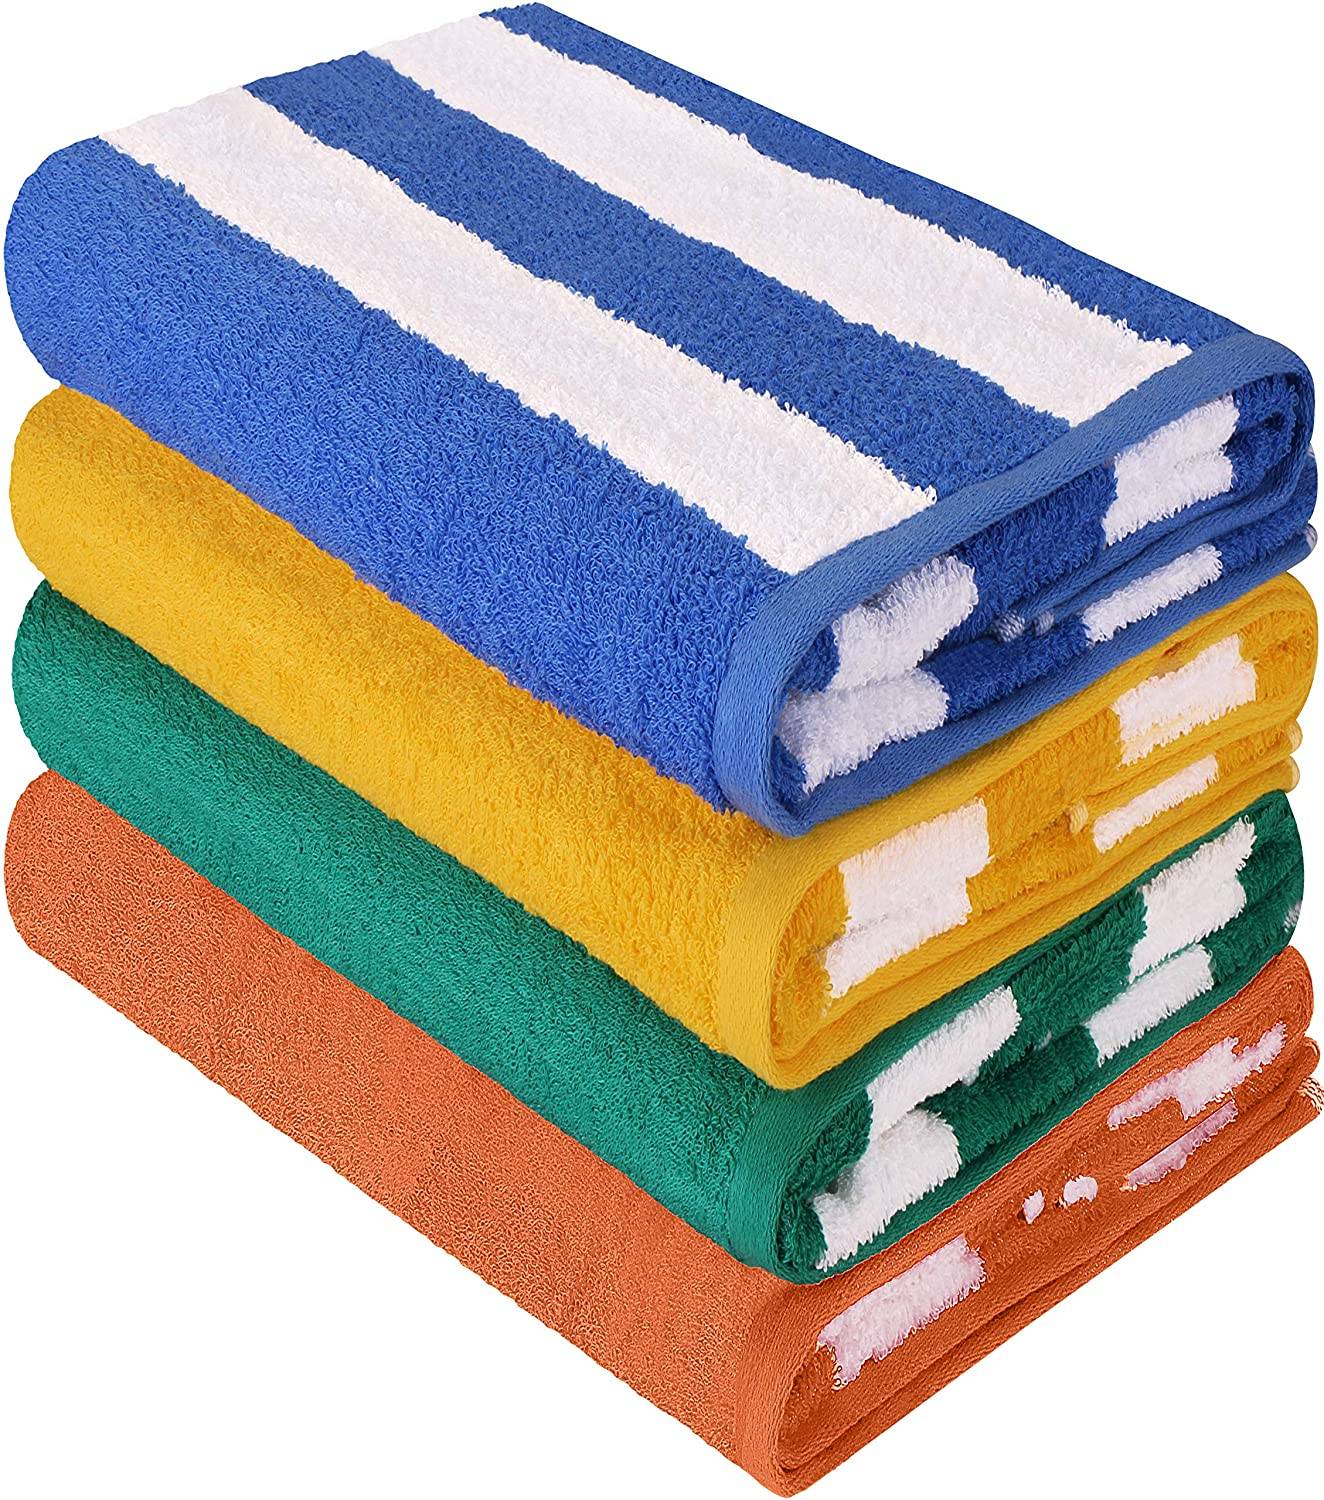 Ordinary Discount Towels - Terry Cabana Stripe Beach Towel – 100% Ring Spun Cotton Large Pool Towels, Soft and Quick Dry Swim Terry towels – SUPER